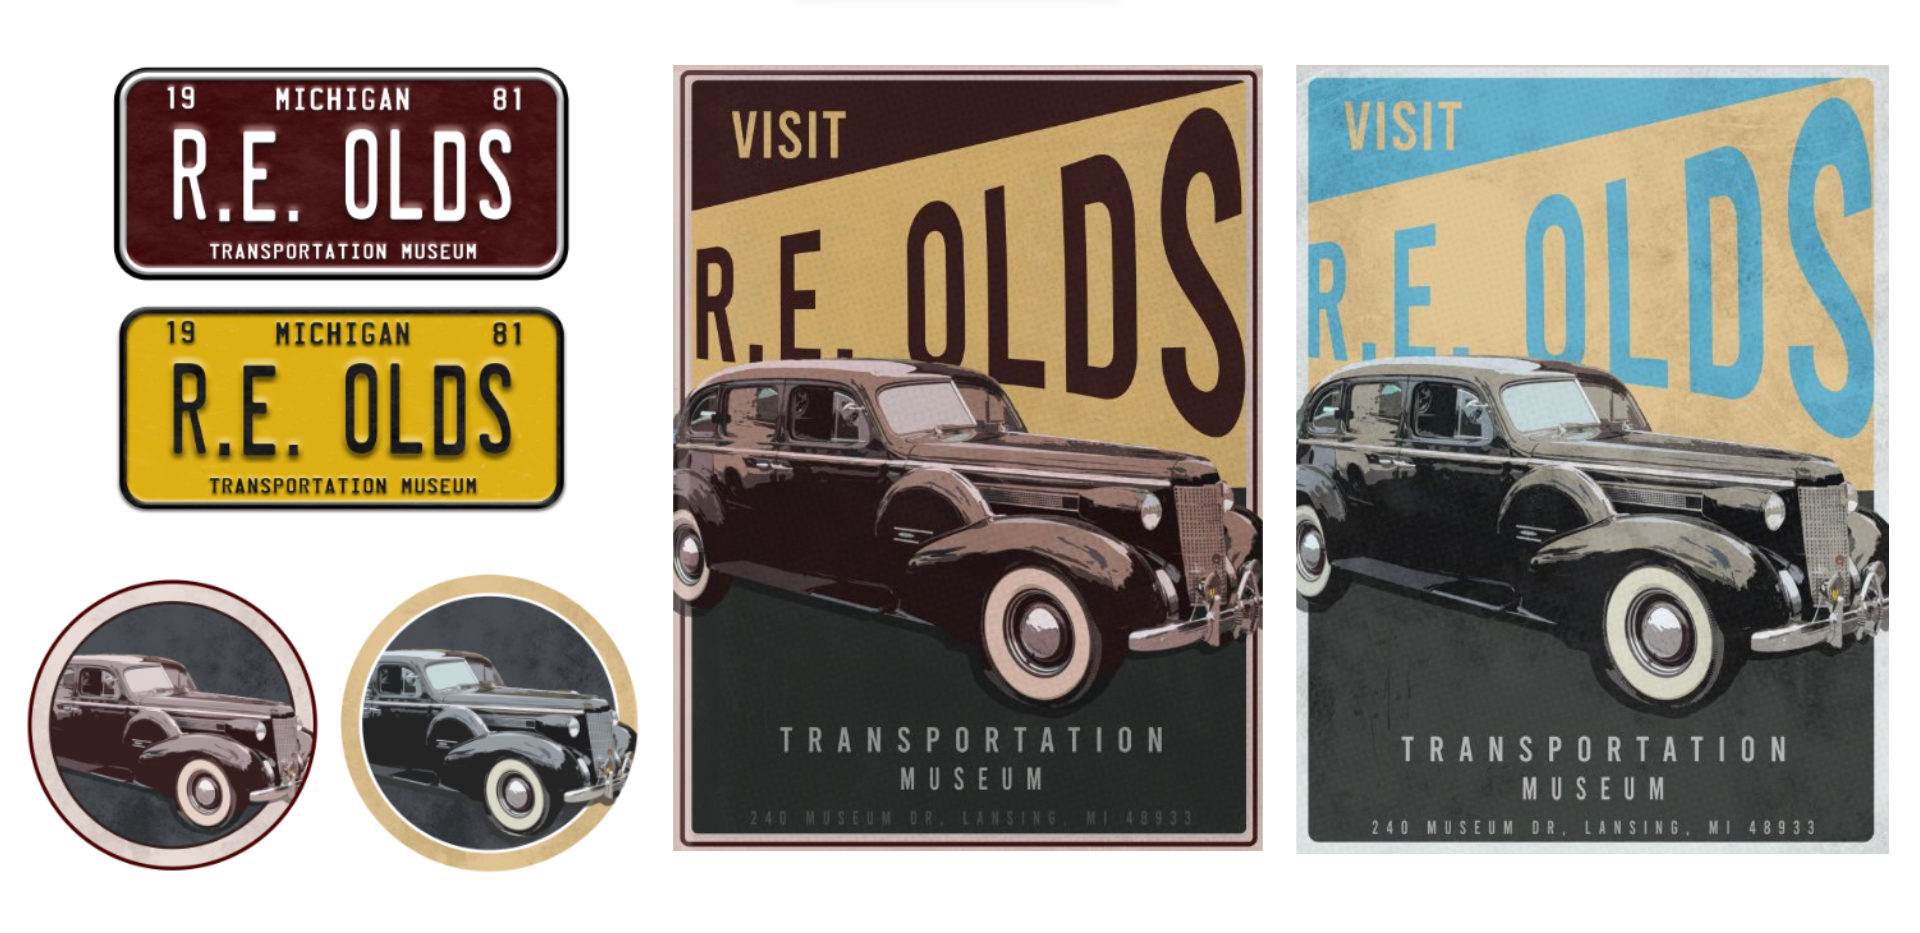 4 sticker designs (red and yellow license plates and an old car); 2 posters that say "R. E. Olds Transportation Museum"